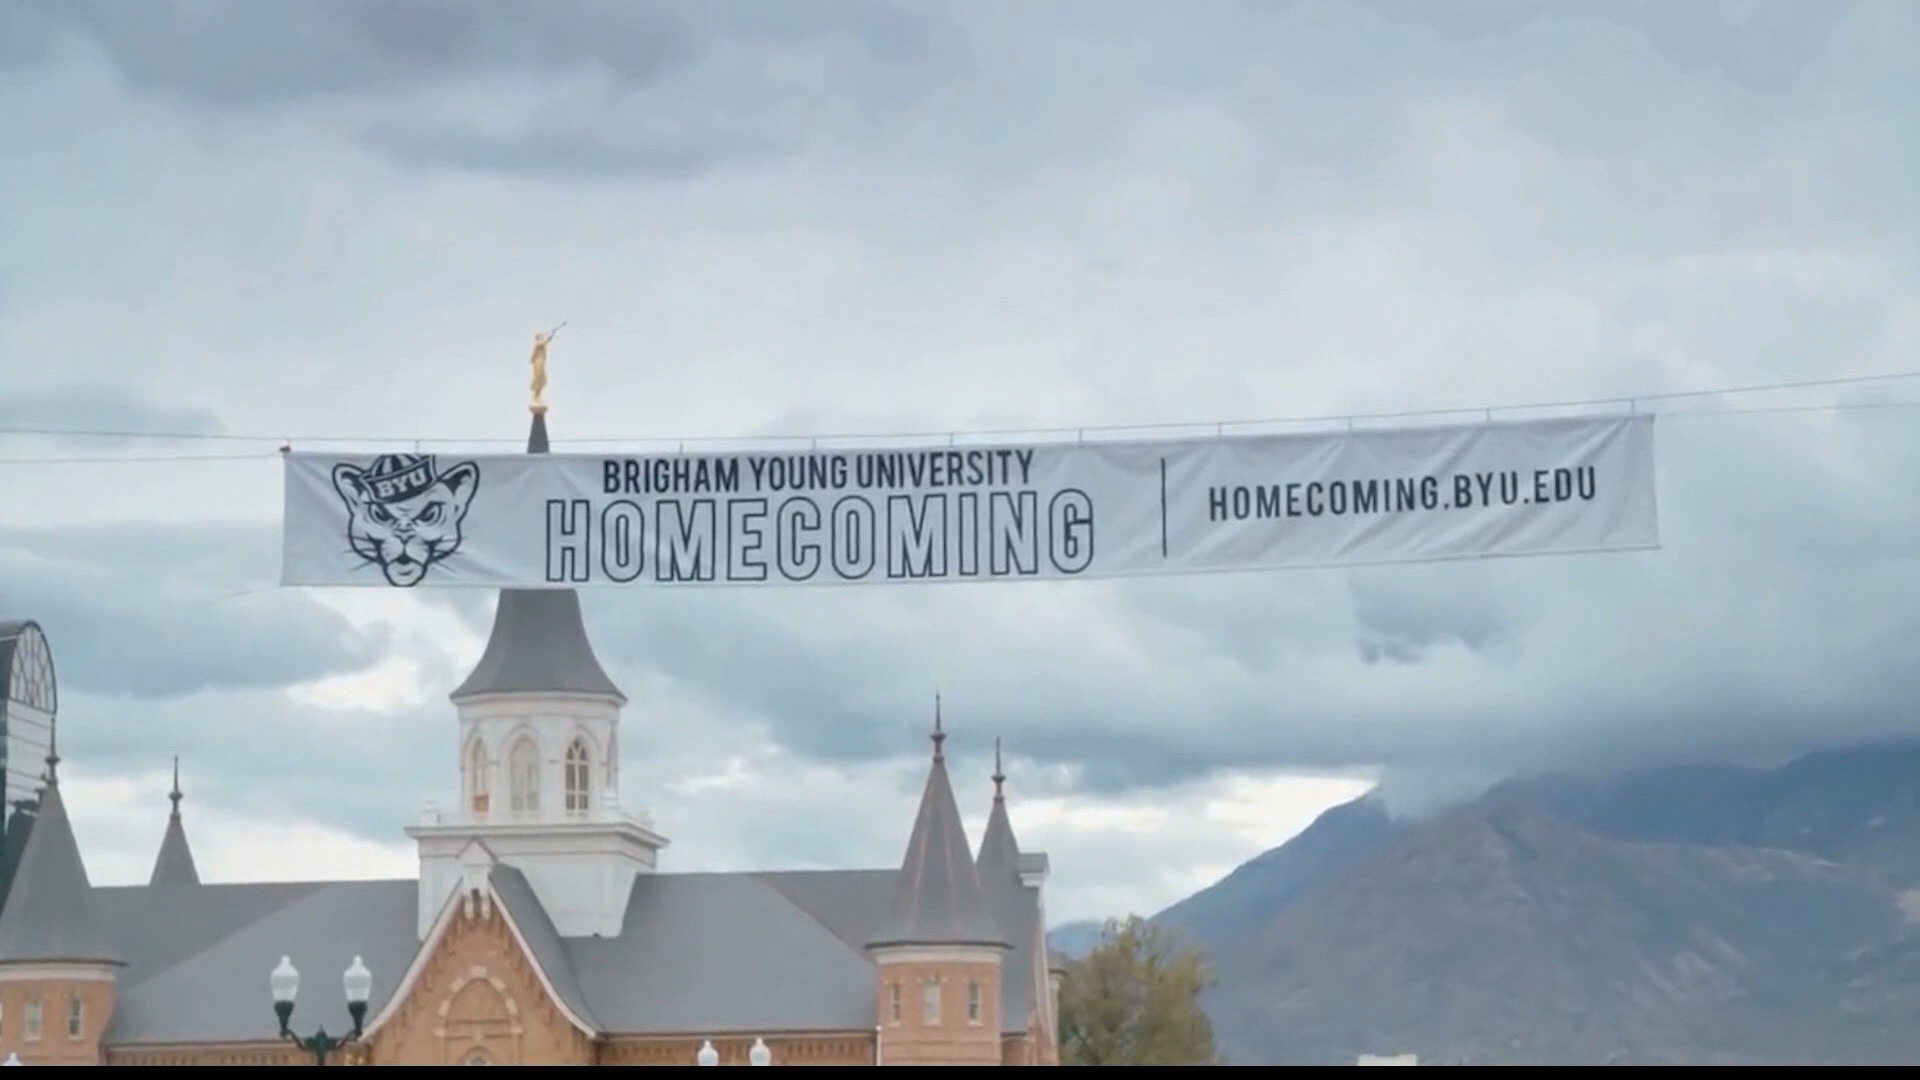 BYU Week activities give students a place to belong The